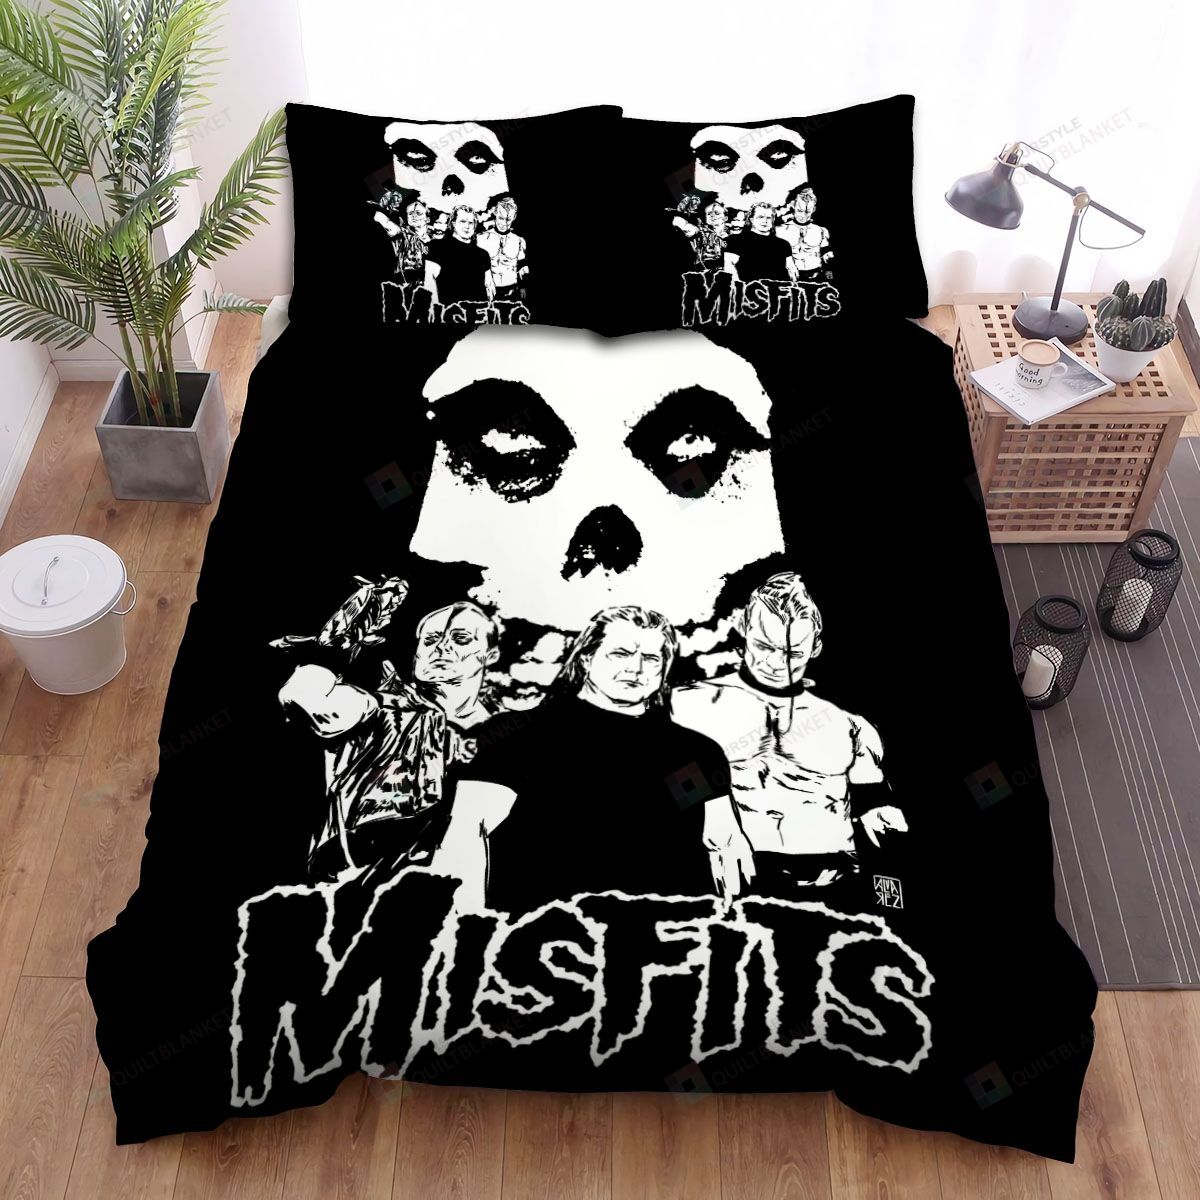 Misfits Members Black And White Art Bed Sheets Spread Comforter Duvet Cover Bedding Sets